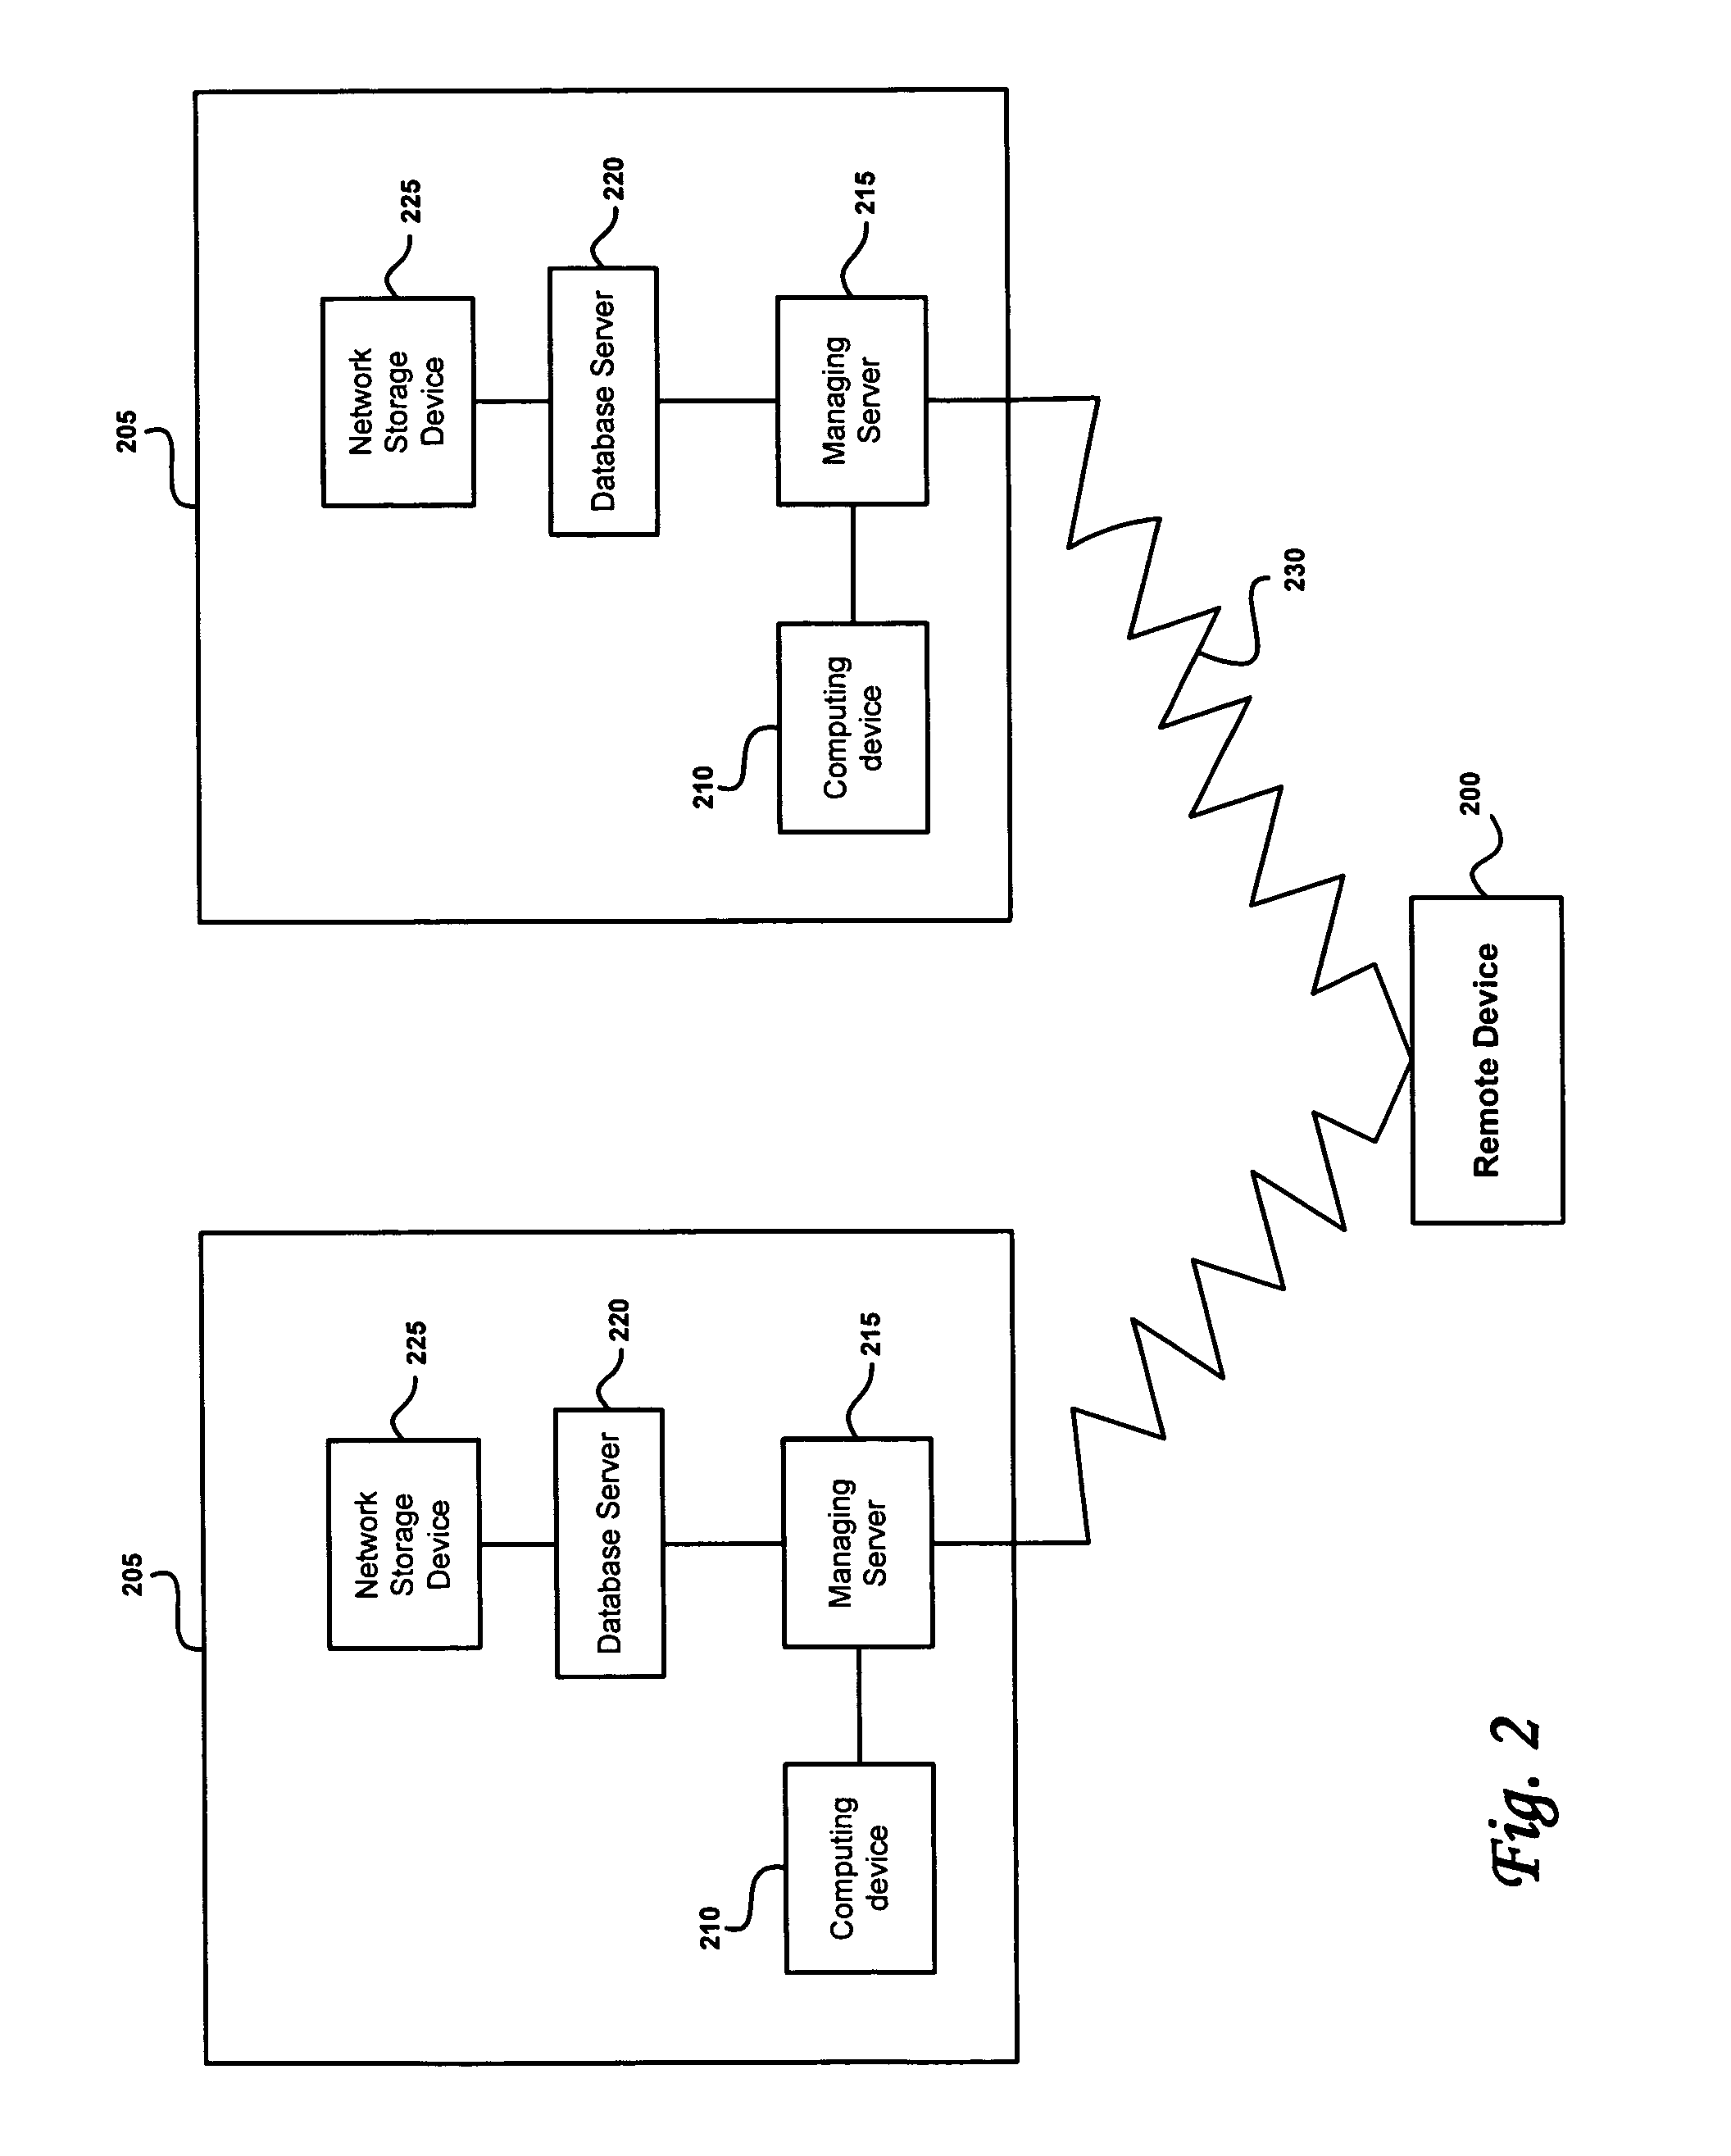 Systems and methods for developing a comprehensive patient health profile